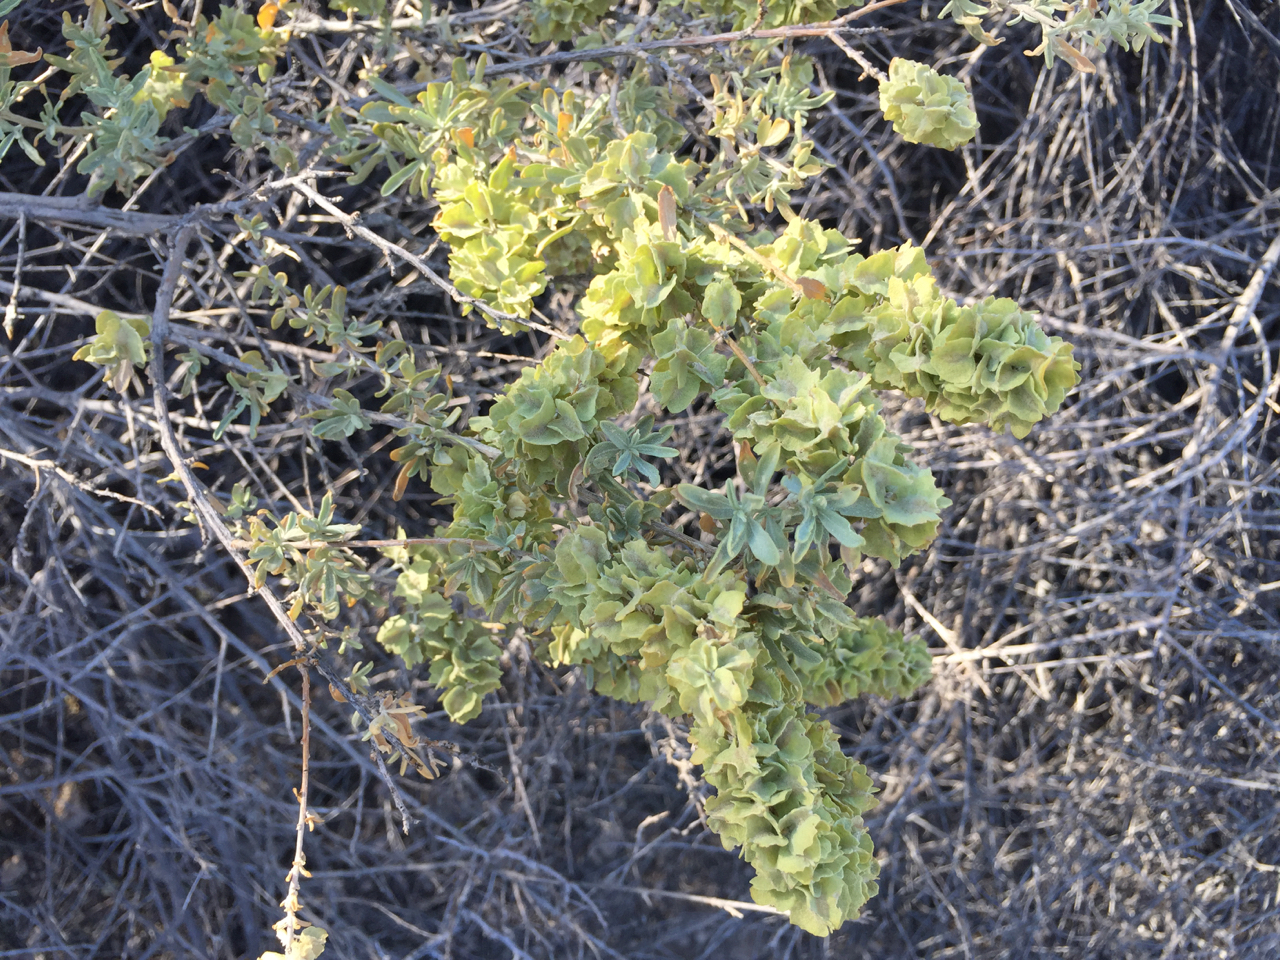 Single branch of a shrub with heavy load of roundish light green/yellow seeds.